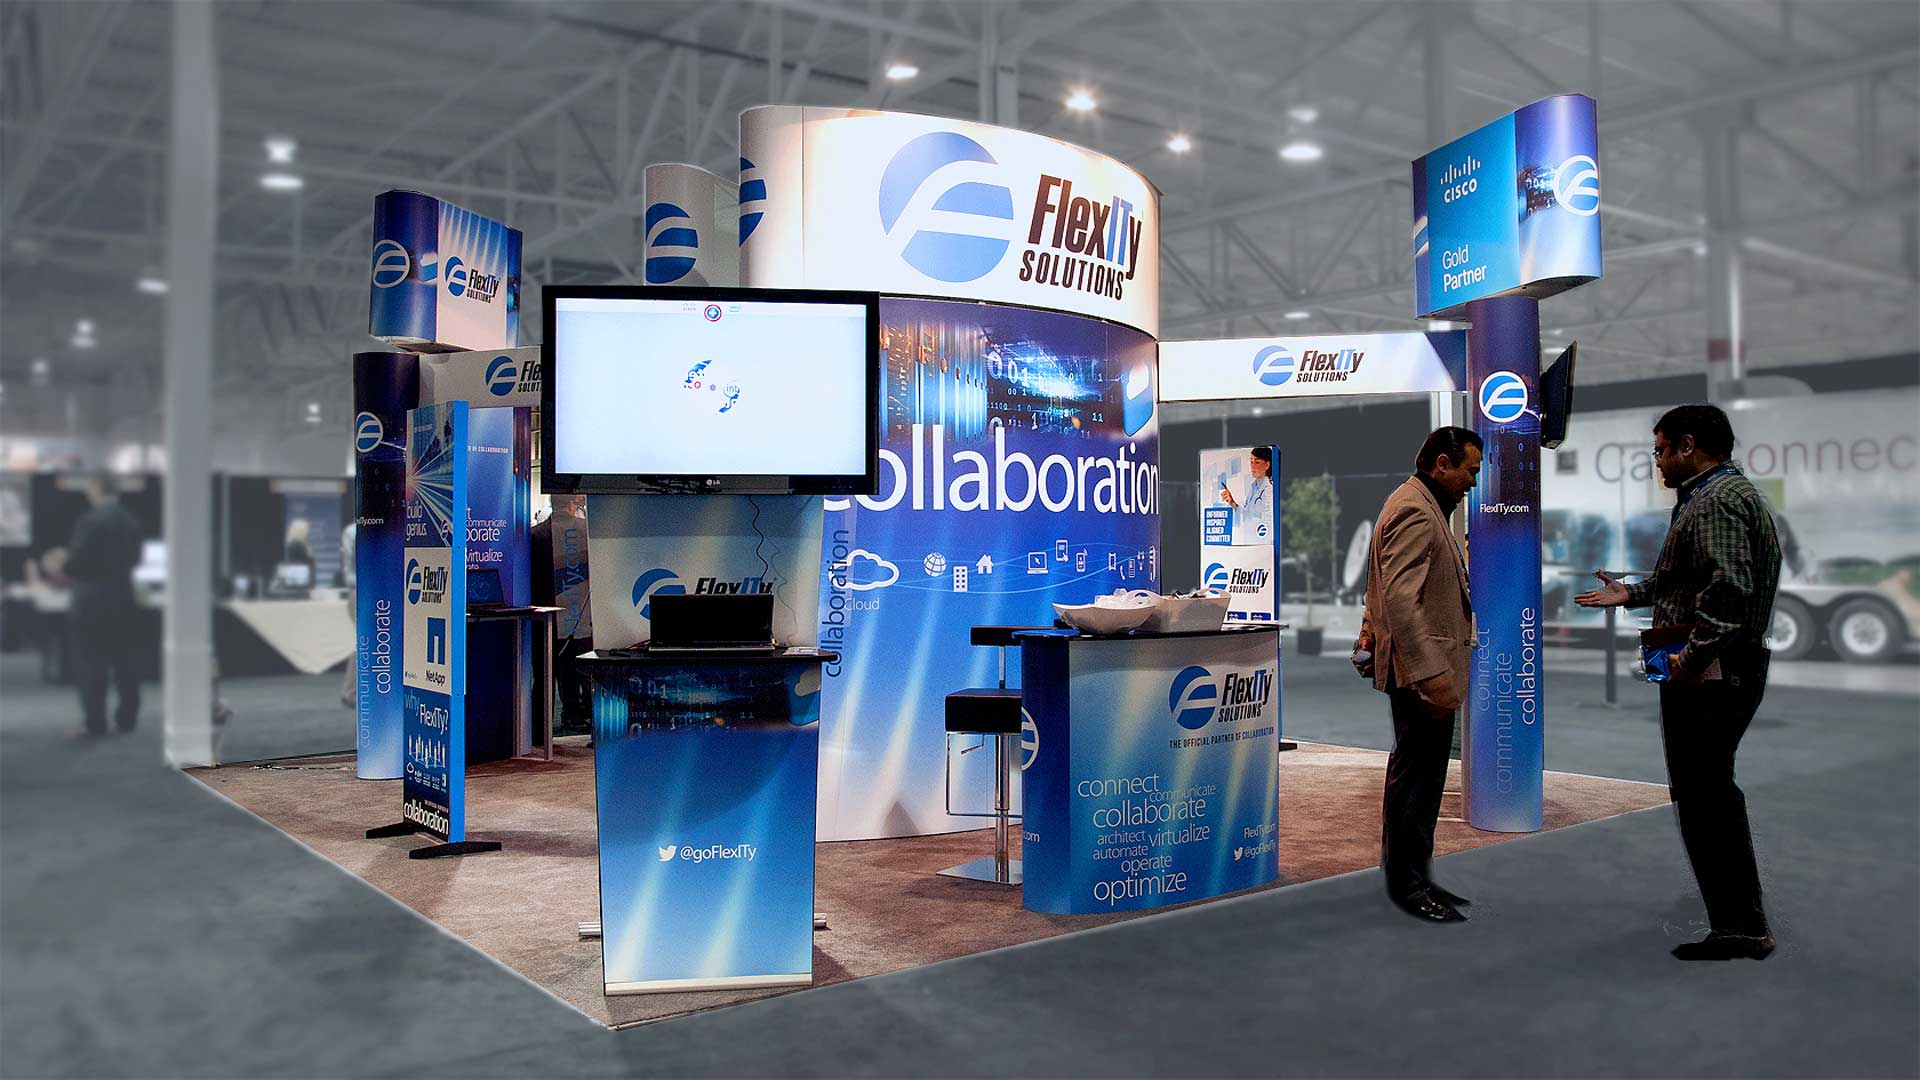 All of our display solutions are designed to make your brand and products stand out!